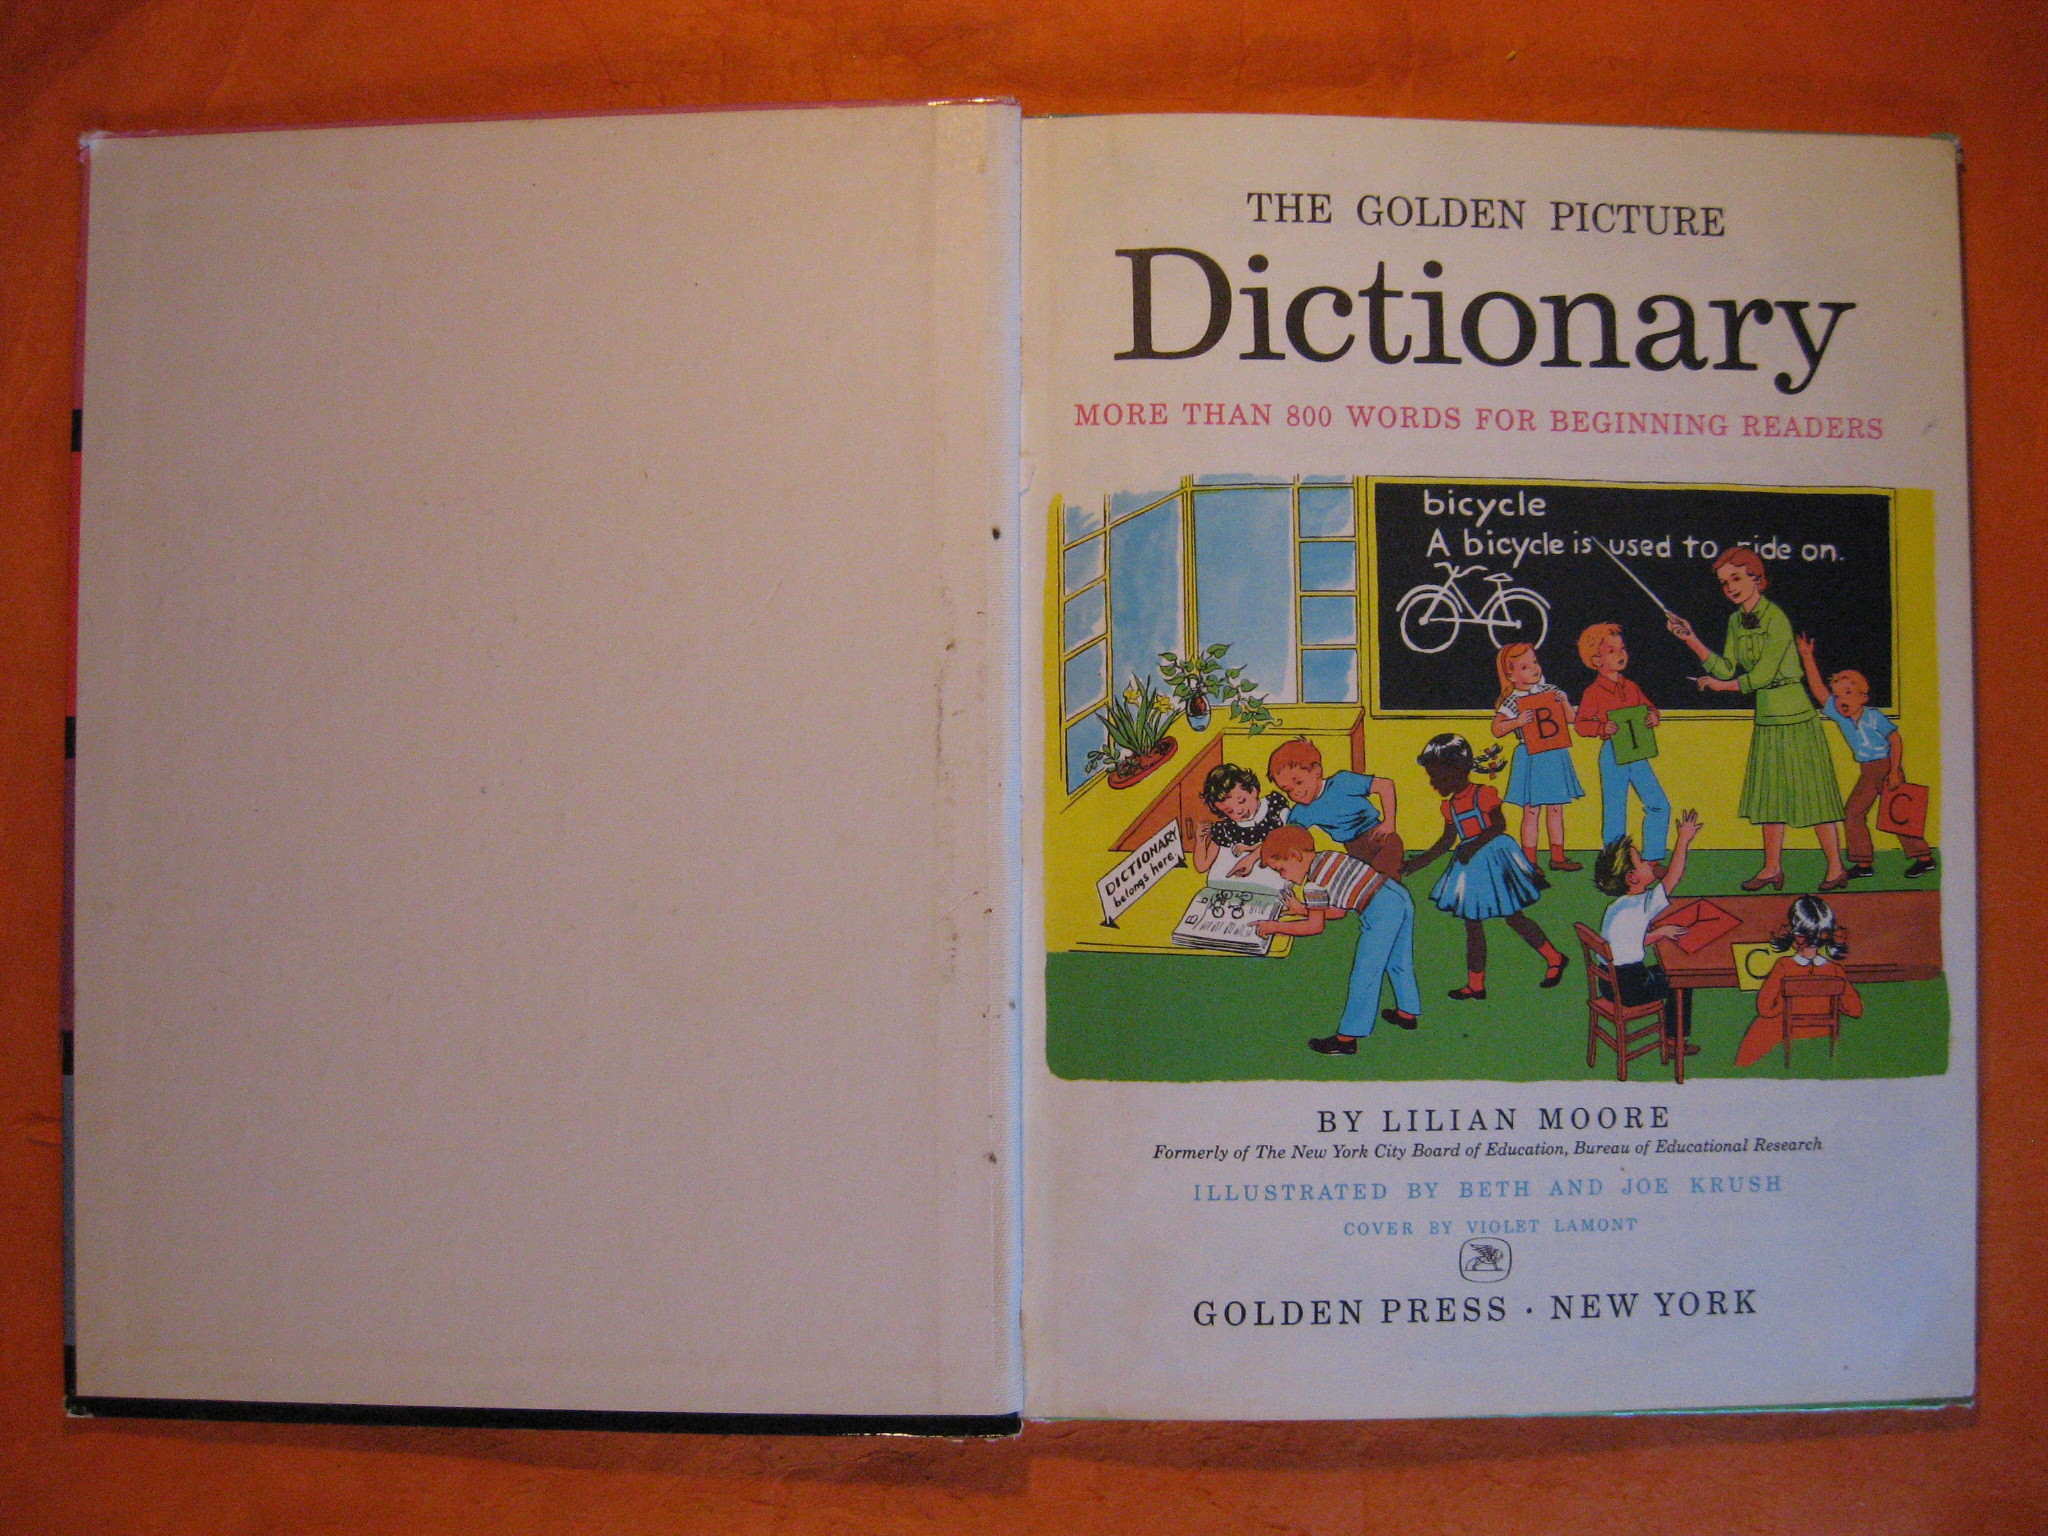 The Golden Picture Dictionary for Beginning Readers